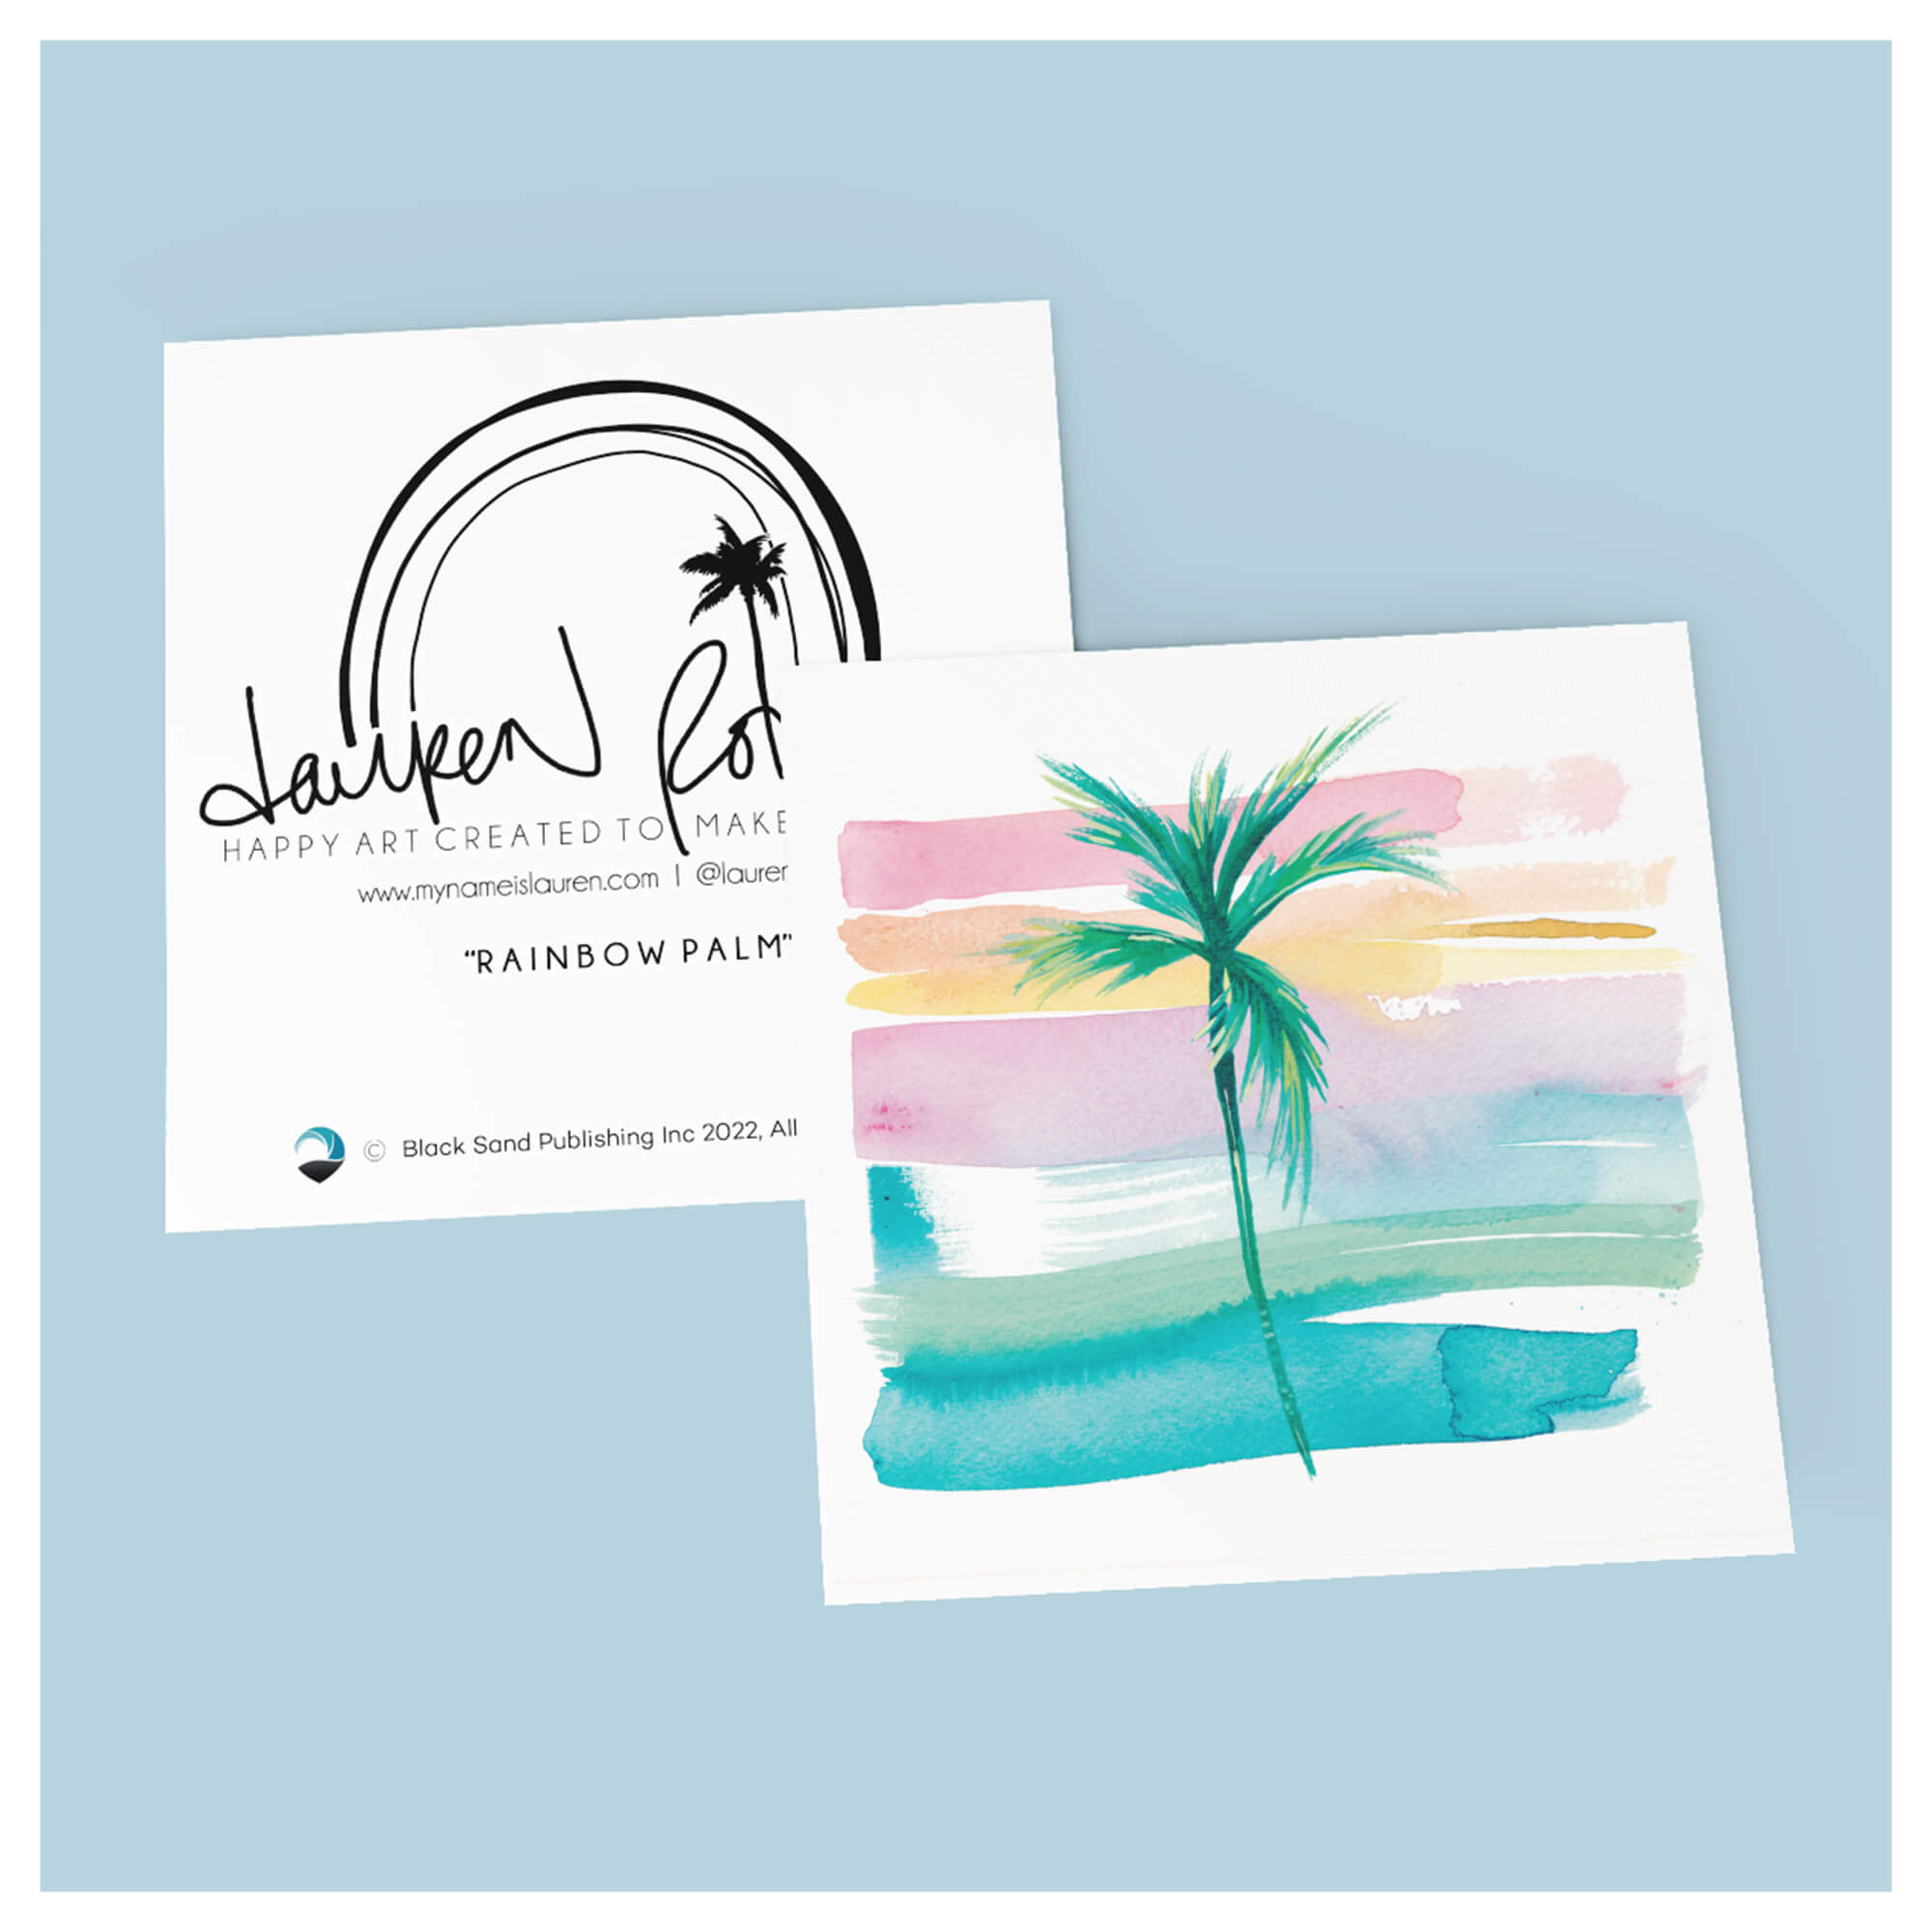 A greeting card that features a palm tree with colorful pastel-hued background by famous Hawaii artist Lauren Roth